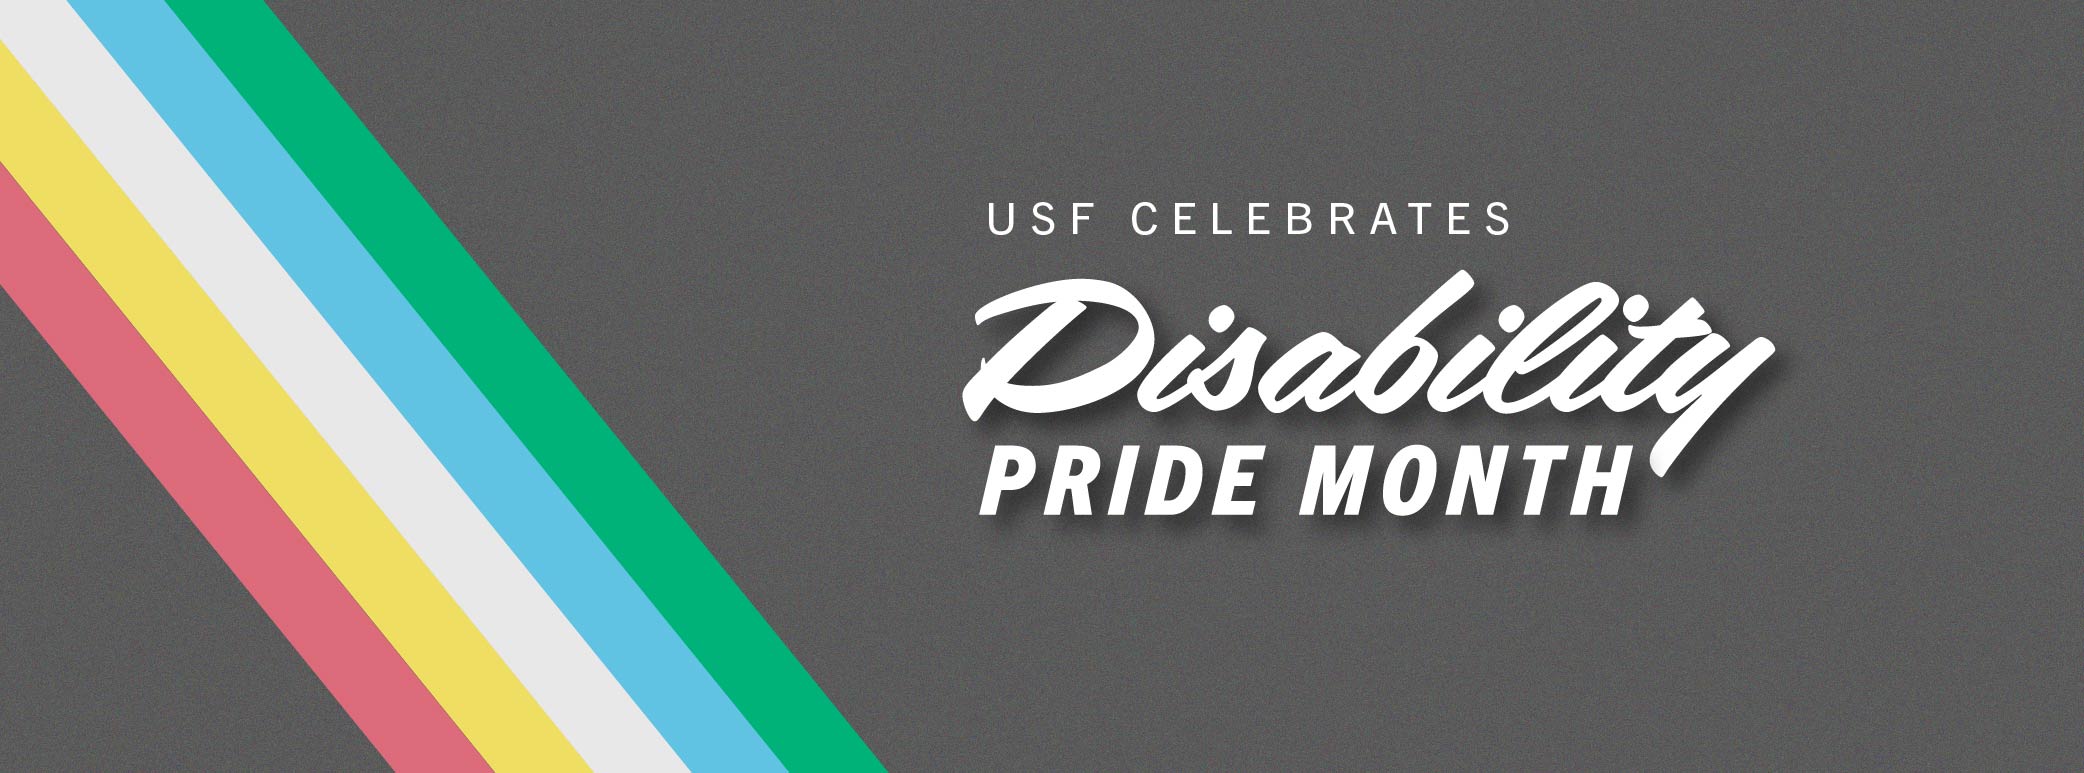 USF Celebrates Disability Pride Month text with multi-colored primary diagonal stripe